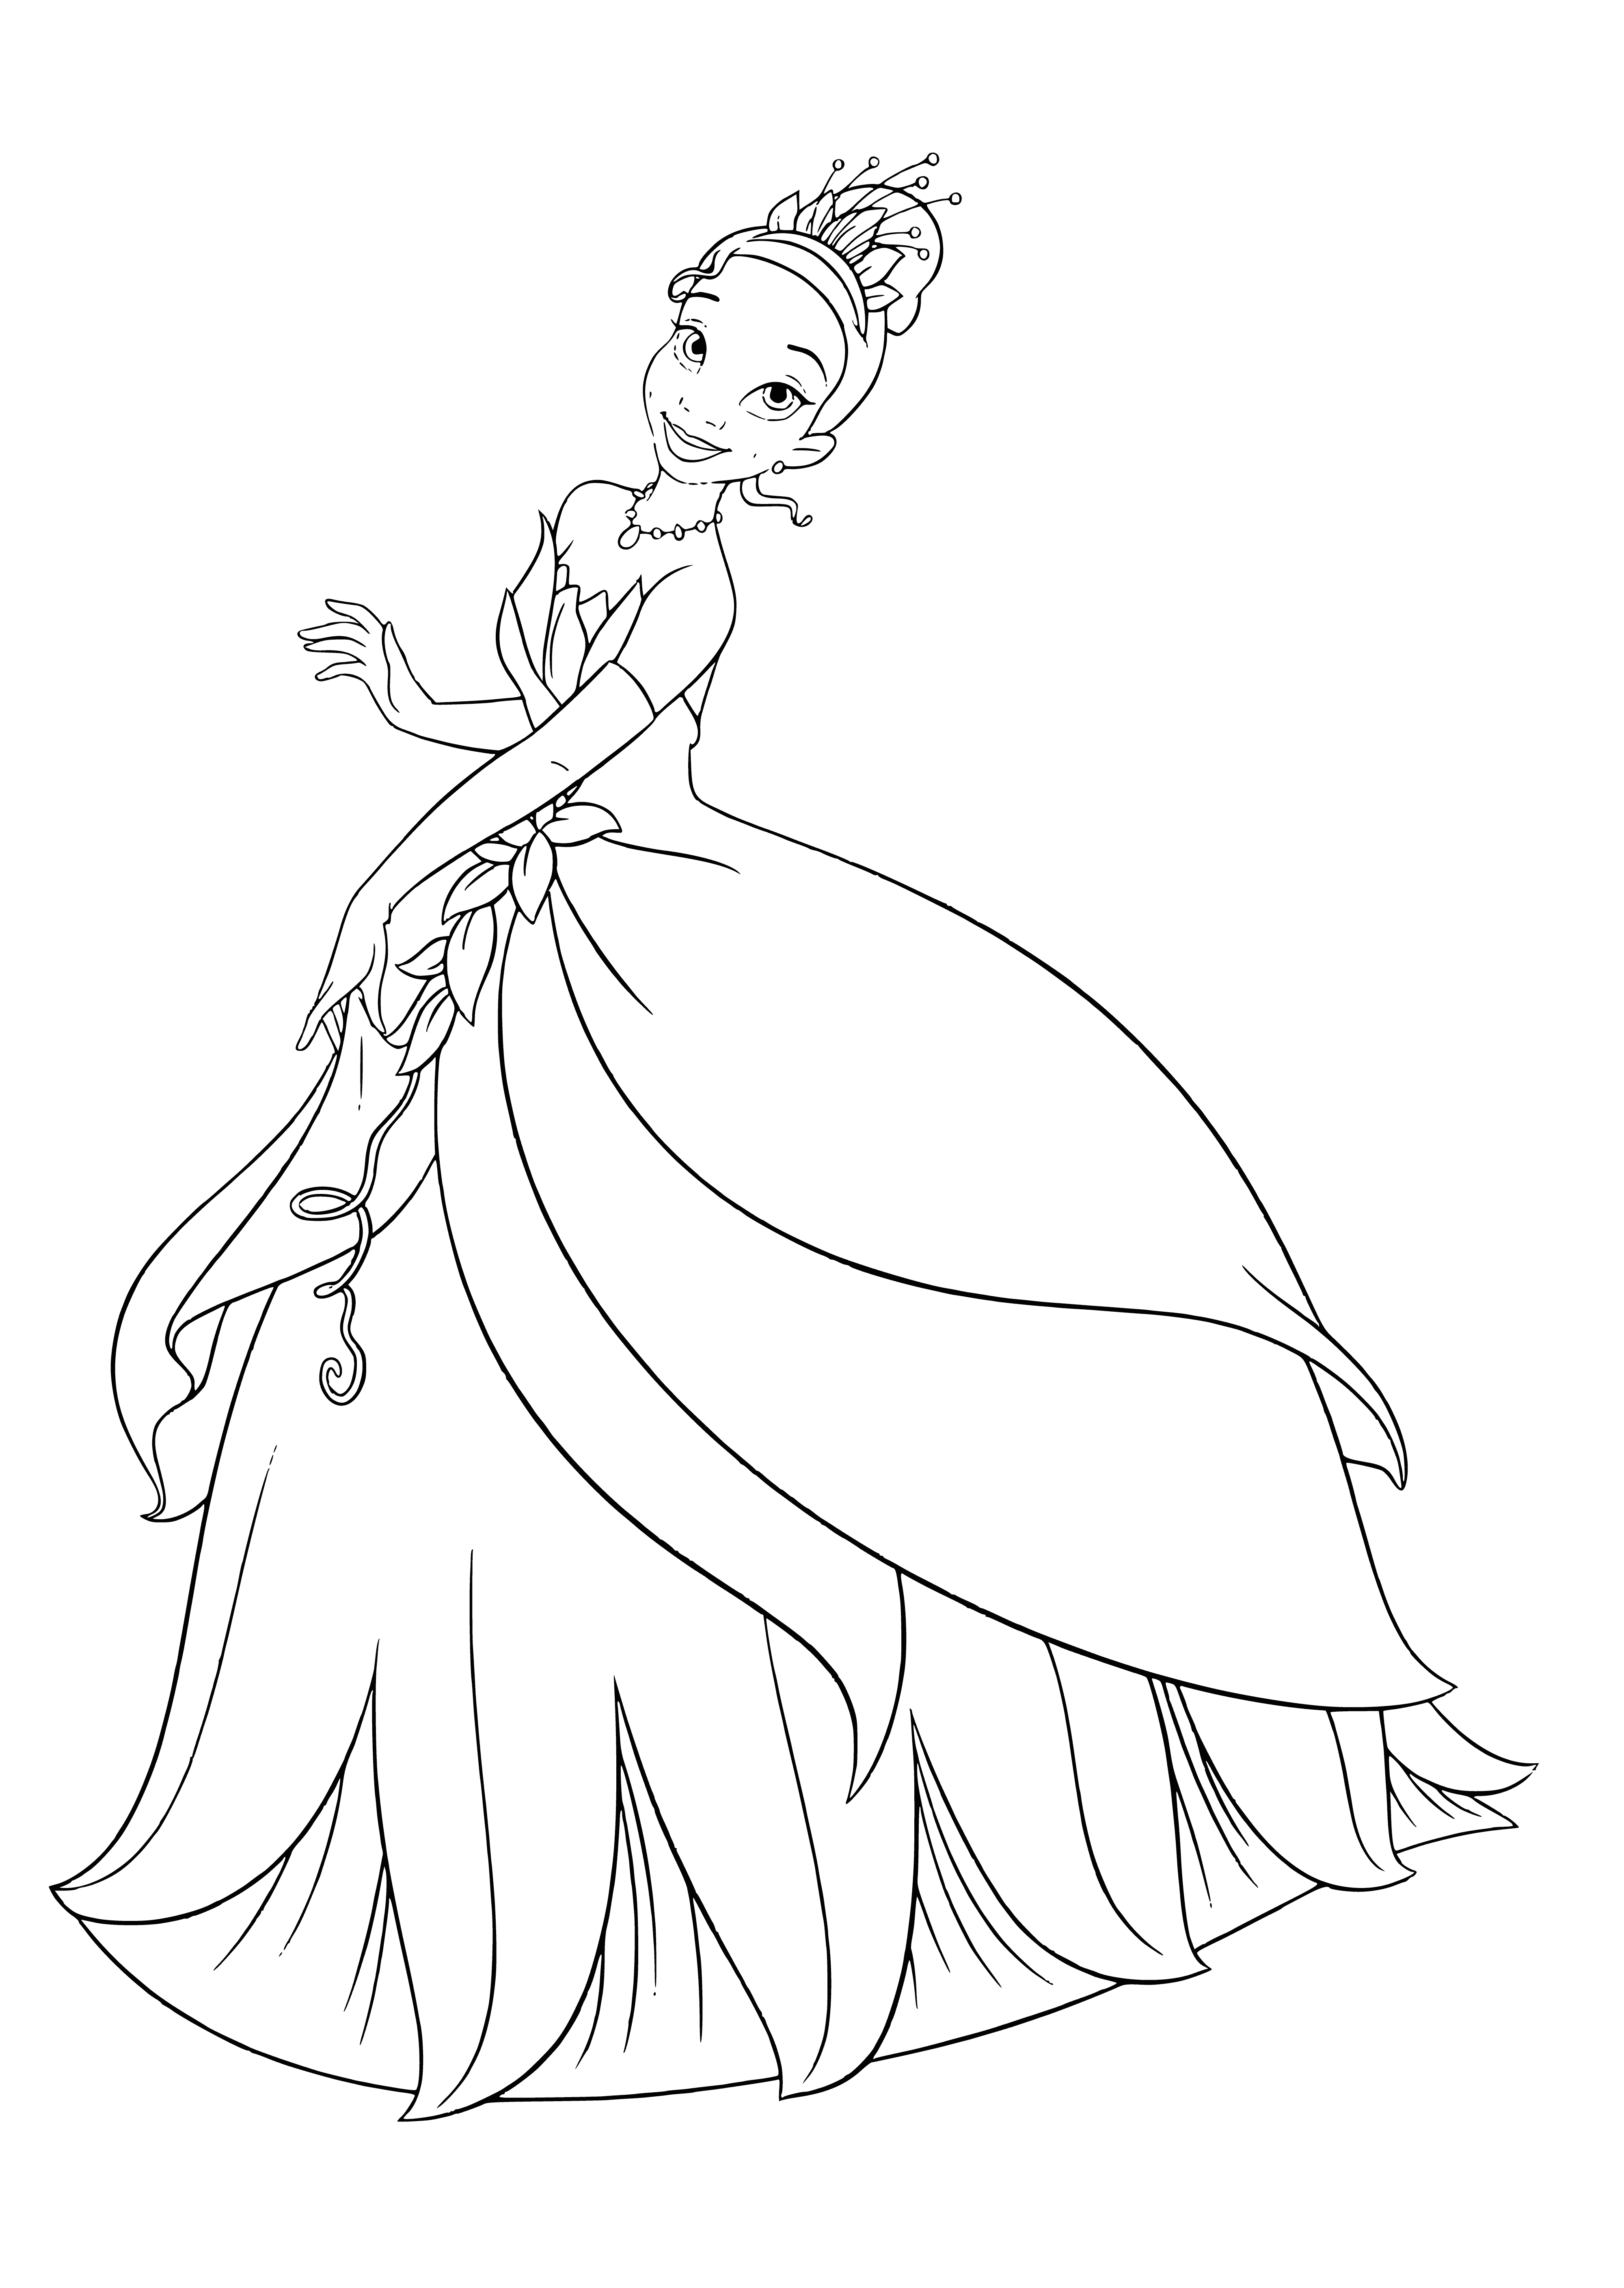 coloring page: Princess Tiana kneels gracefully in a green dress, purple sash, & gold tiara, a purple frog prince perched on her shoulder.